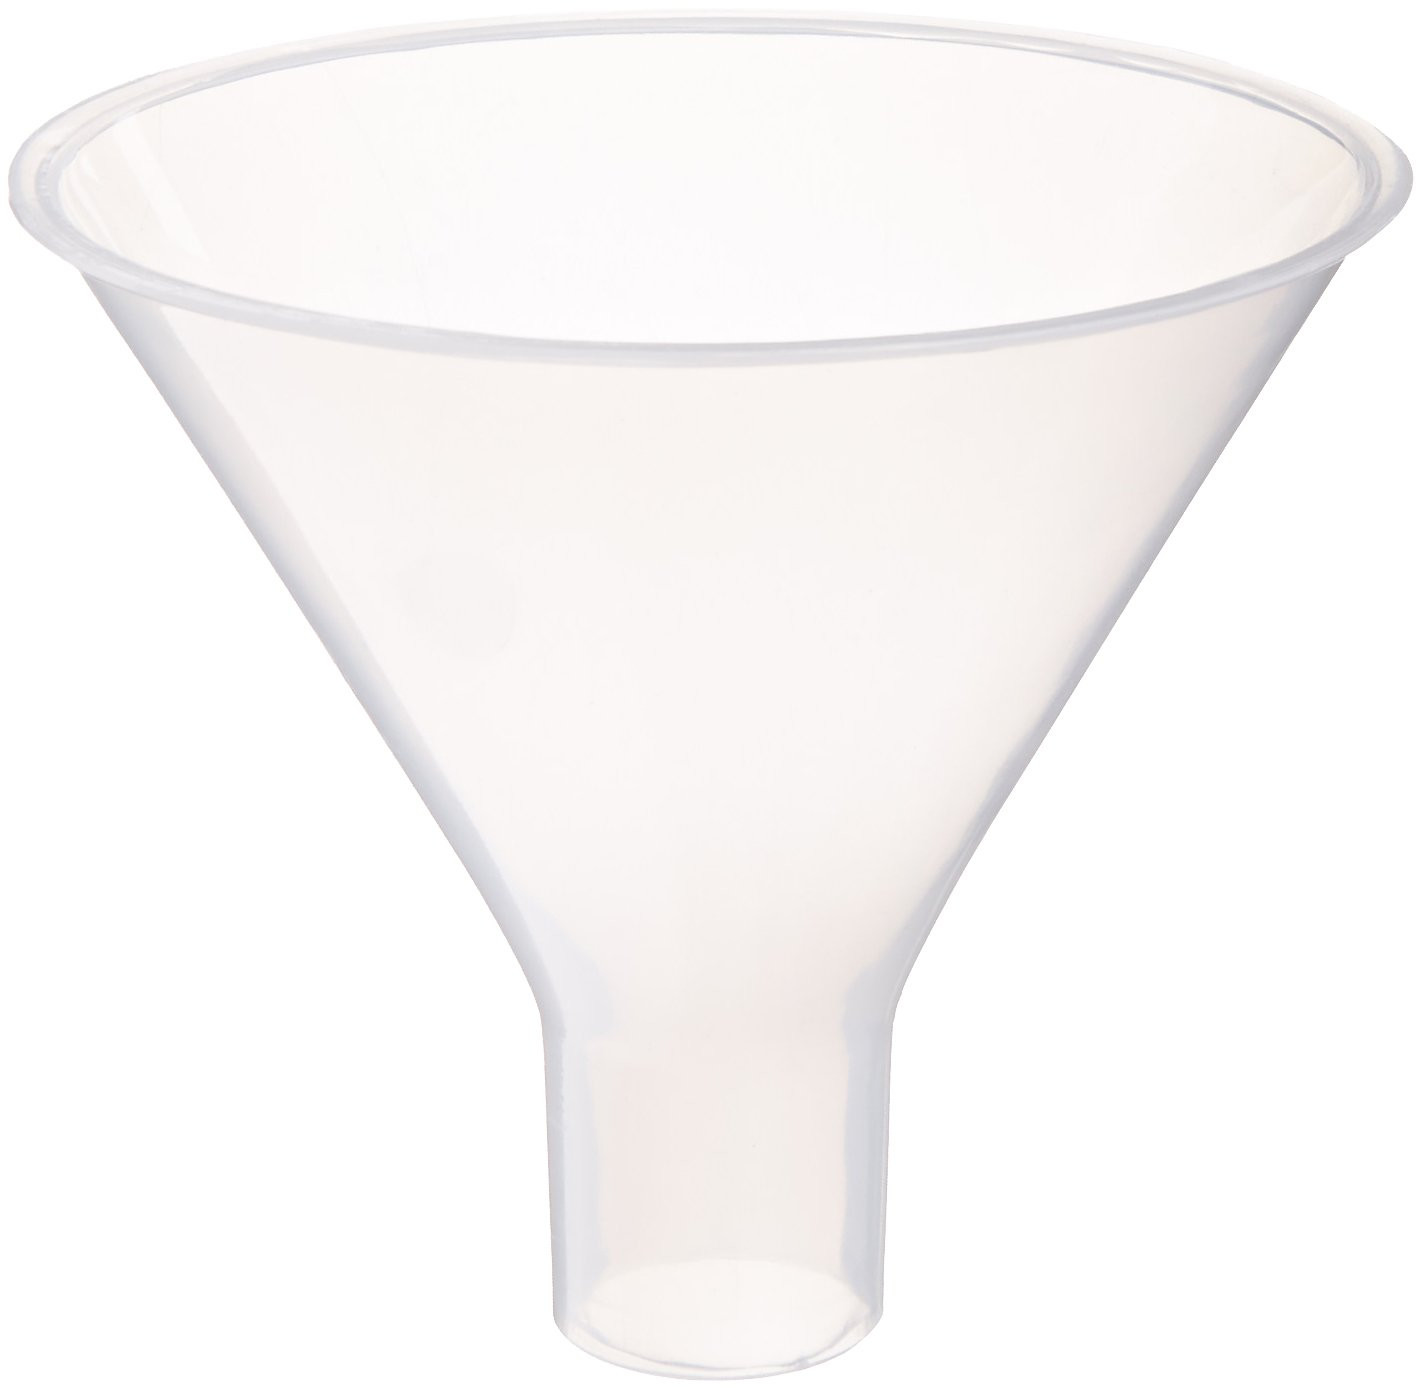 giant margarita glass vase of best rated in lab funnels helpful customer reviews amazon com inside united scientific fpp100 polyethylene powder funnel 150ml capacity pack of six